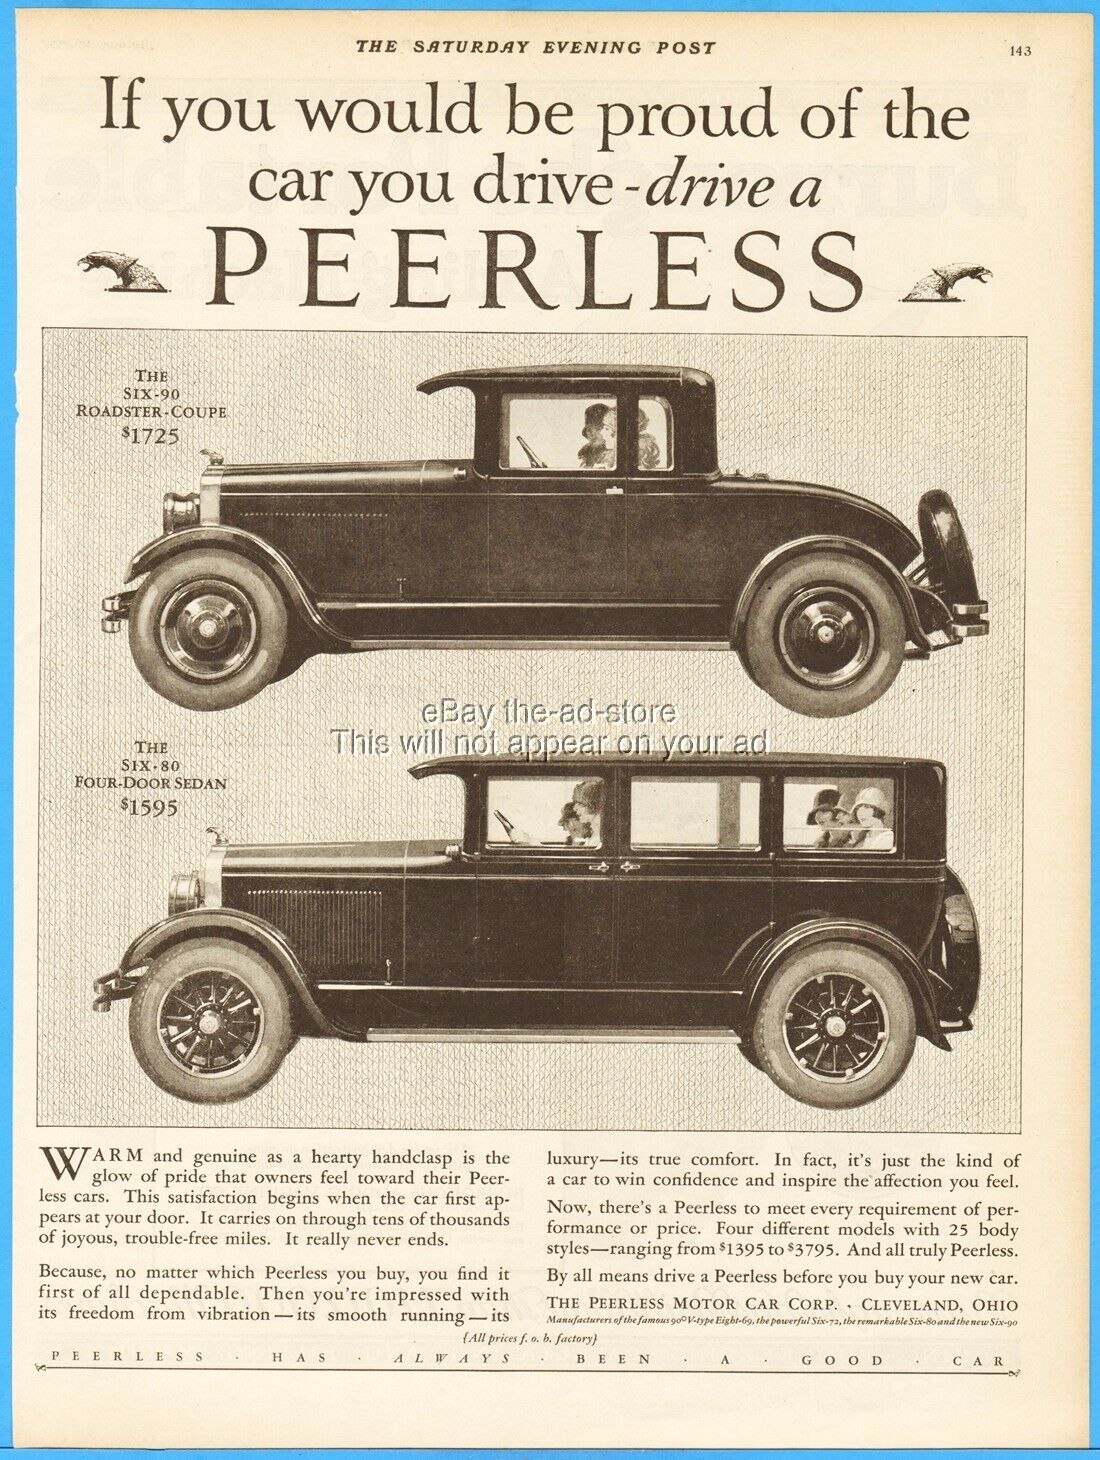 1927 Peerless 6-90 Roadster Coupe Boattail 6-80 Sedan Cleveland OH Car Print Ad